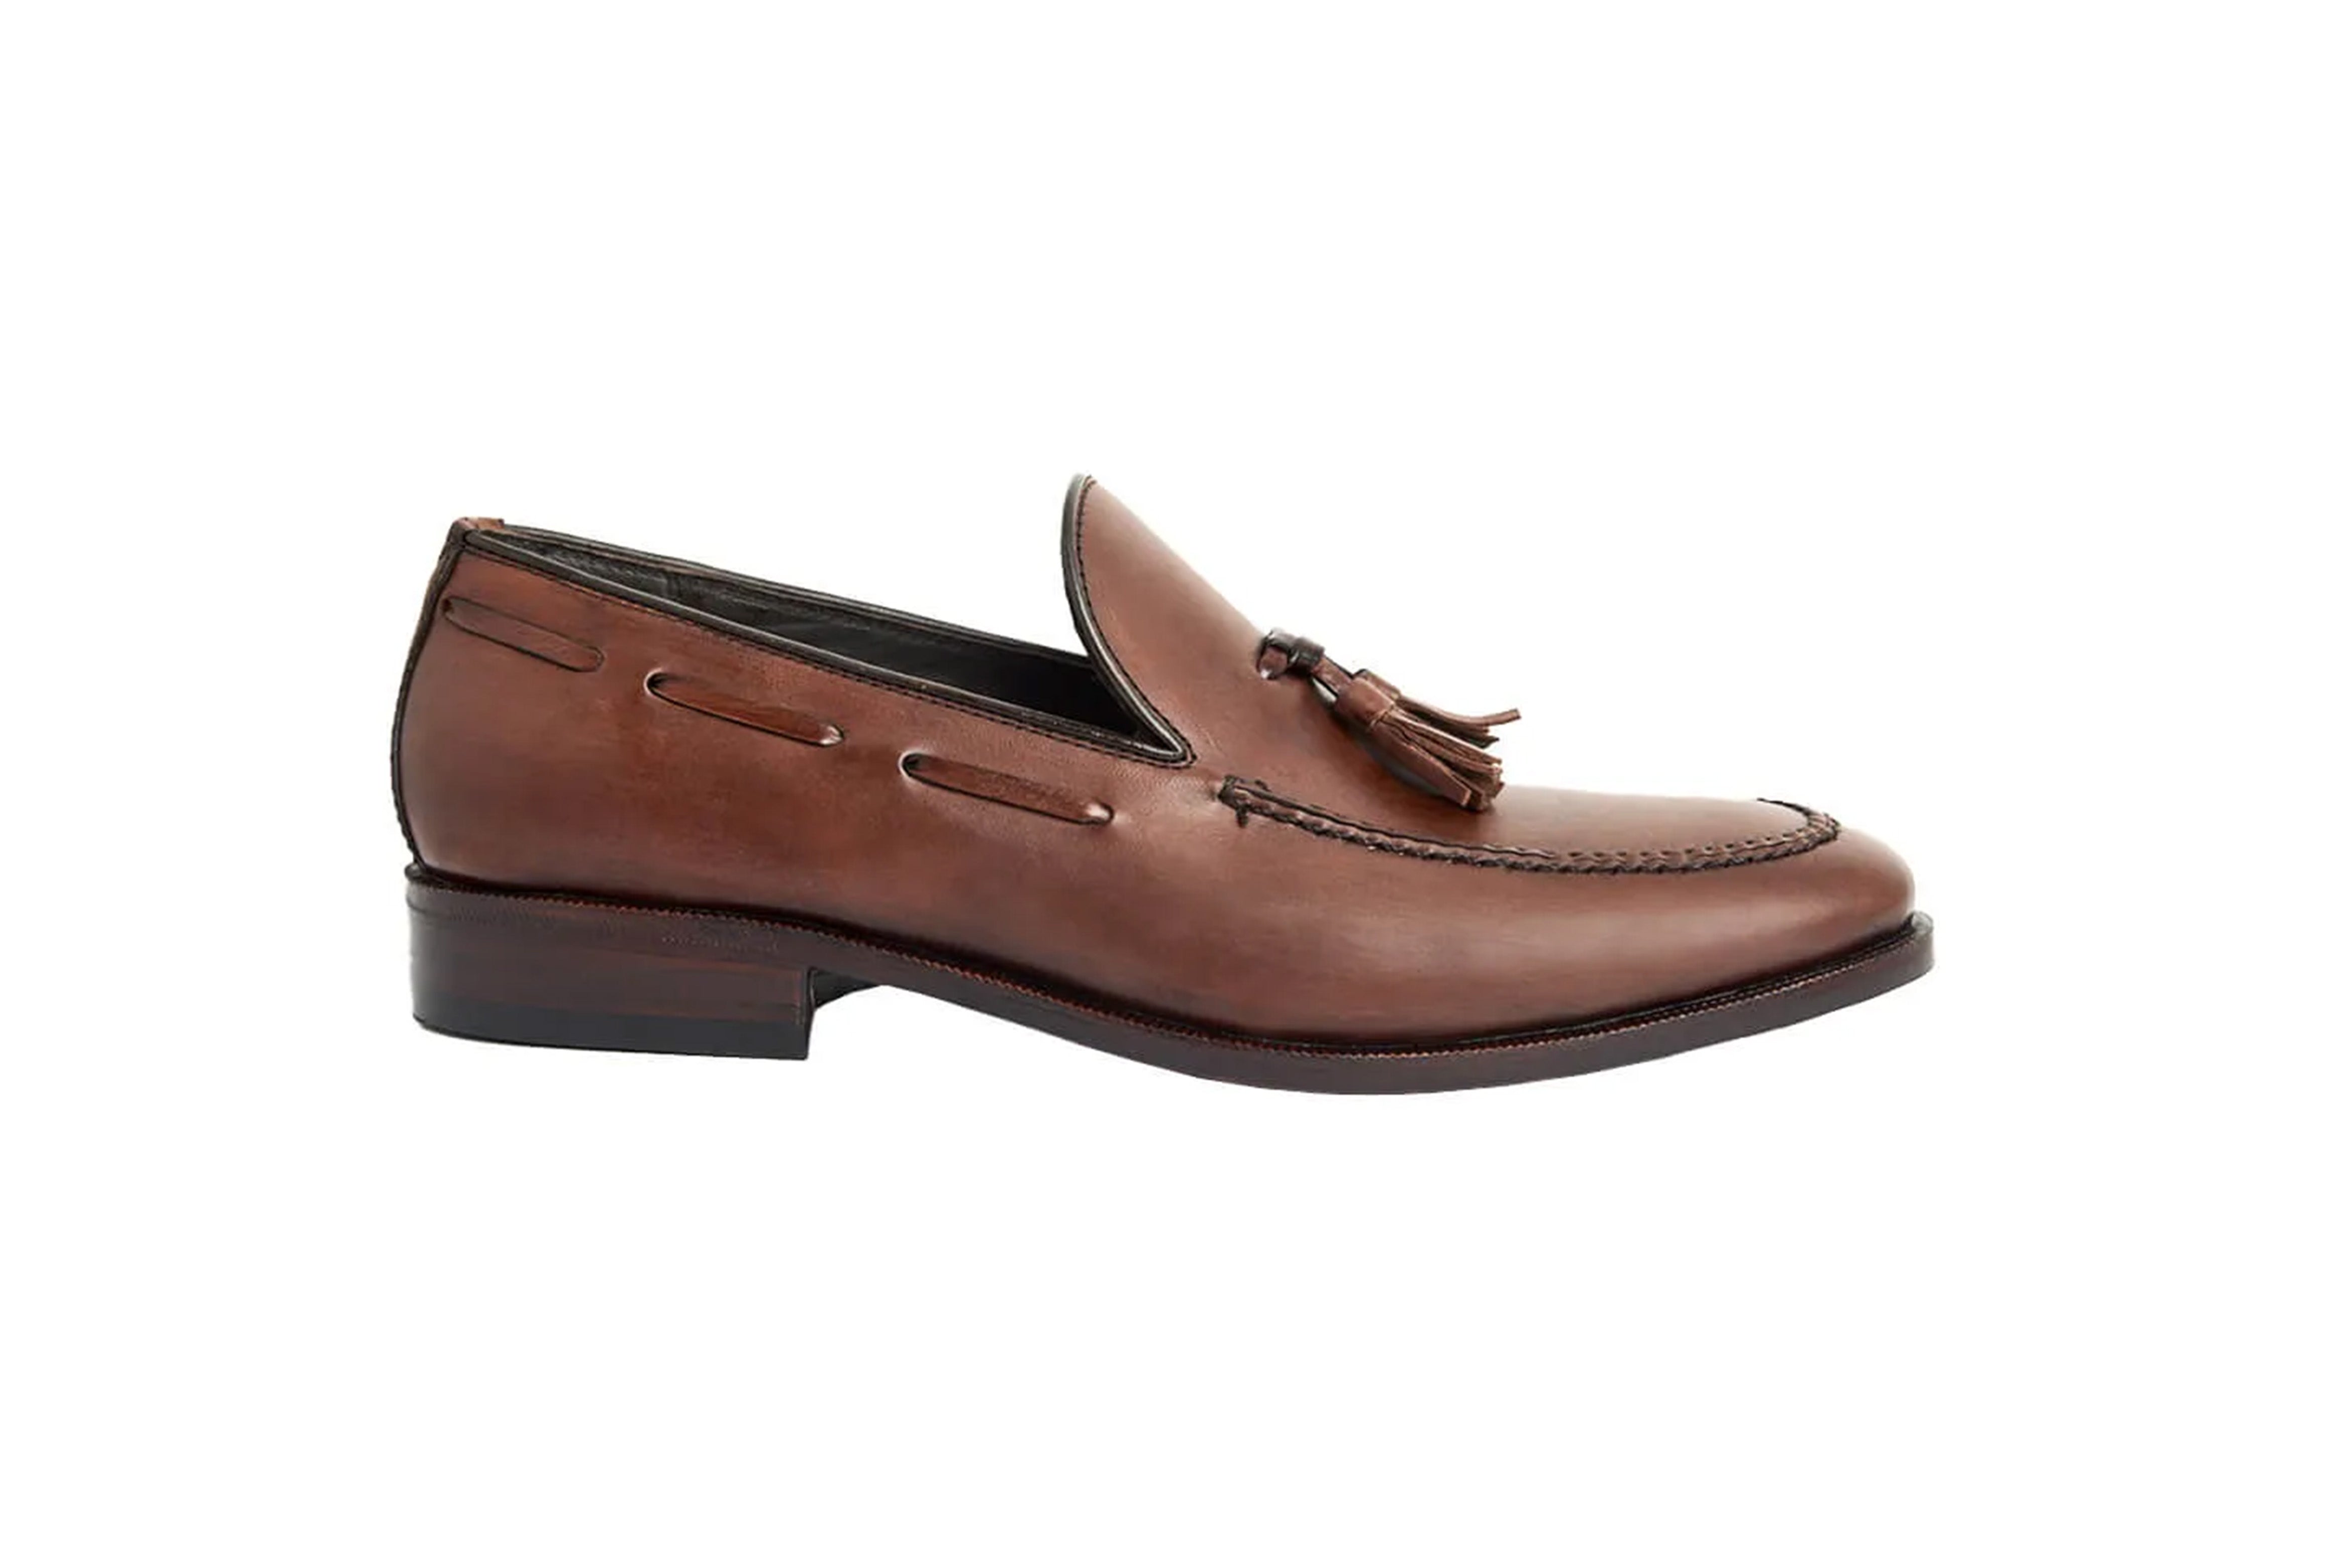 Tassel Loafer Classic - Winston handcrafted color Mahogany